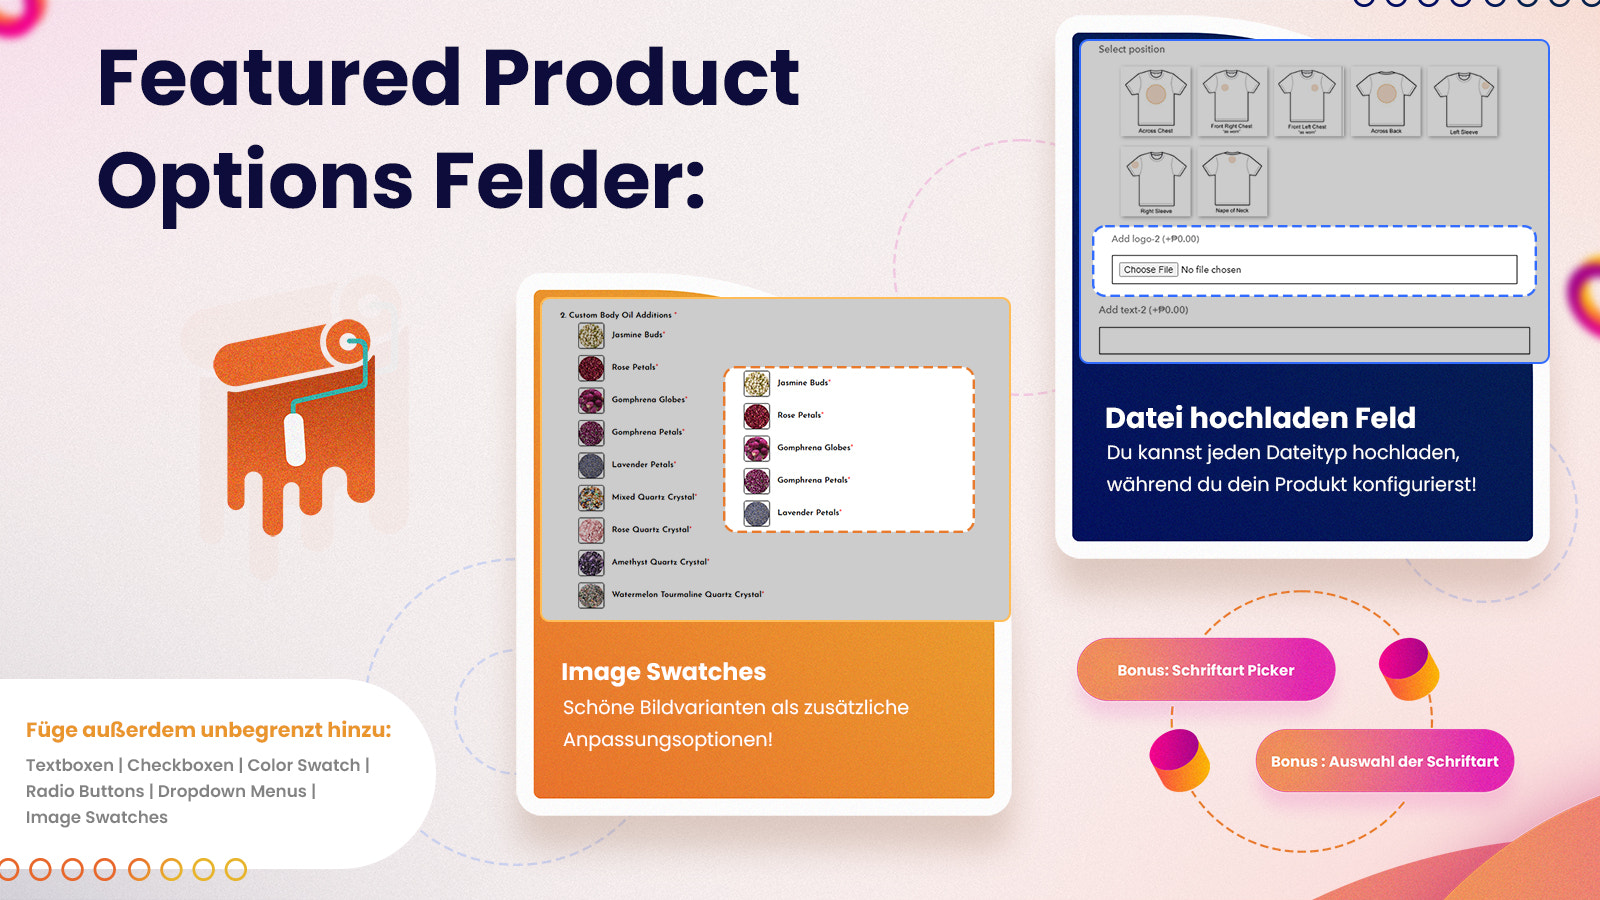 Featured product variants include Shopify file upload & more